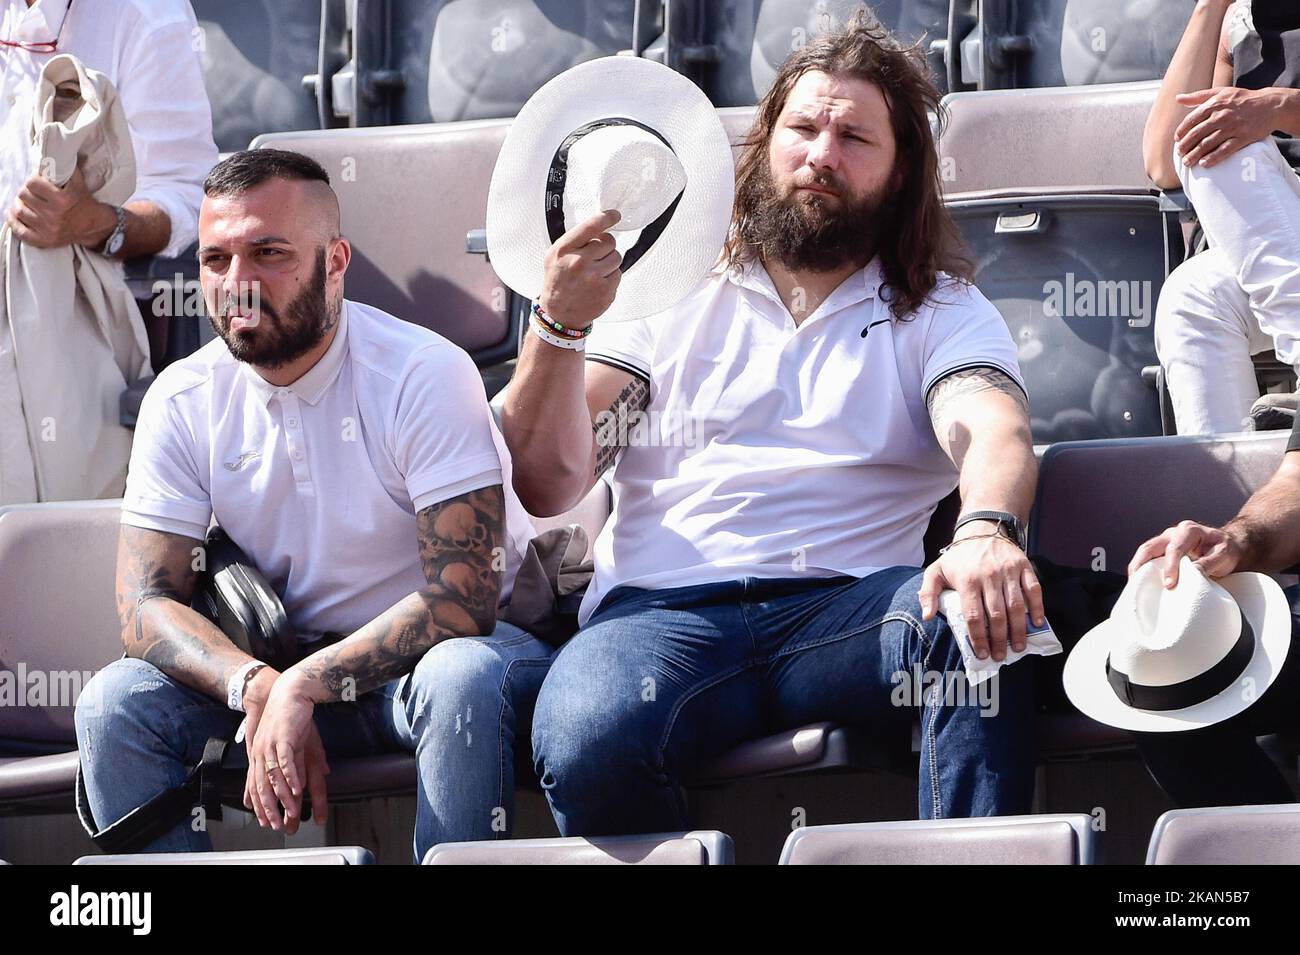 Italian rugby player Martin Castrogiovanni attends the match Johanna Konta (GBR) vs Venus Williams (USA) during the WTA Open Internazionali BNL D'Italia at the Foro Italico, Rome, Italy on 18 May 2017. (Photo by Giuseppe Maffia/NurPhoto) *** Please Use Credit from Credit Field *** Stock Photo